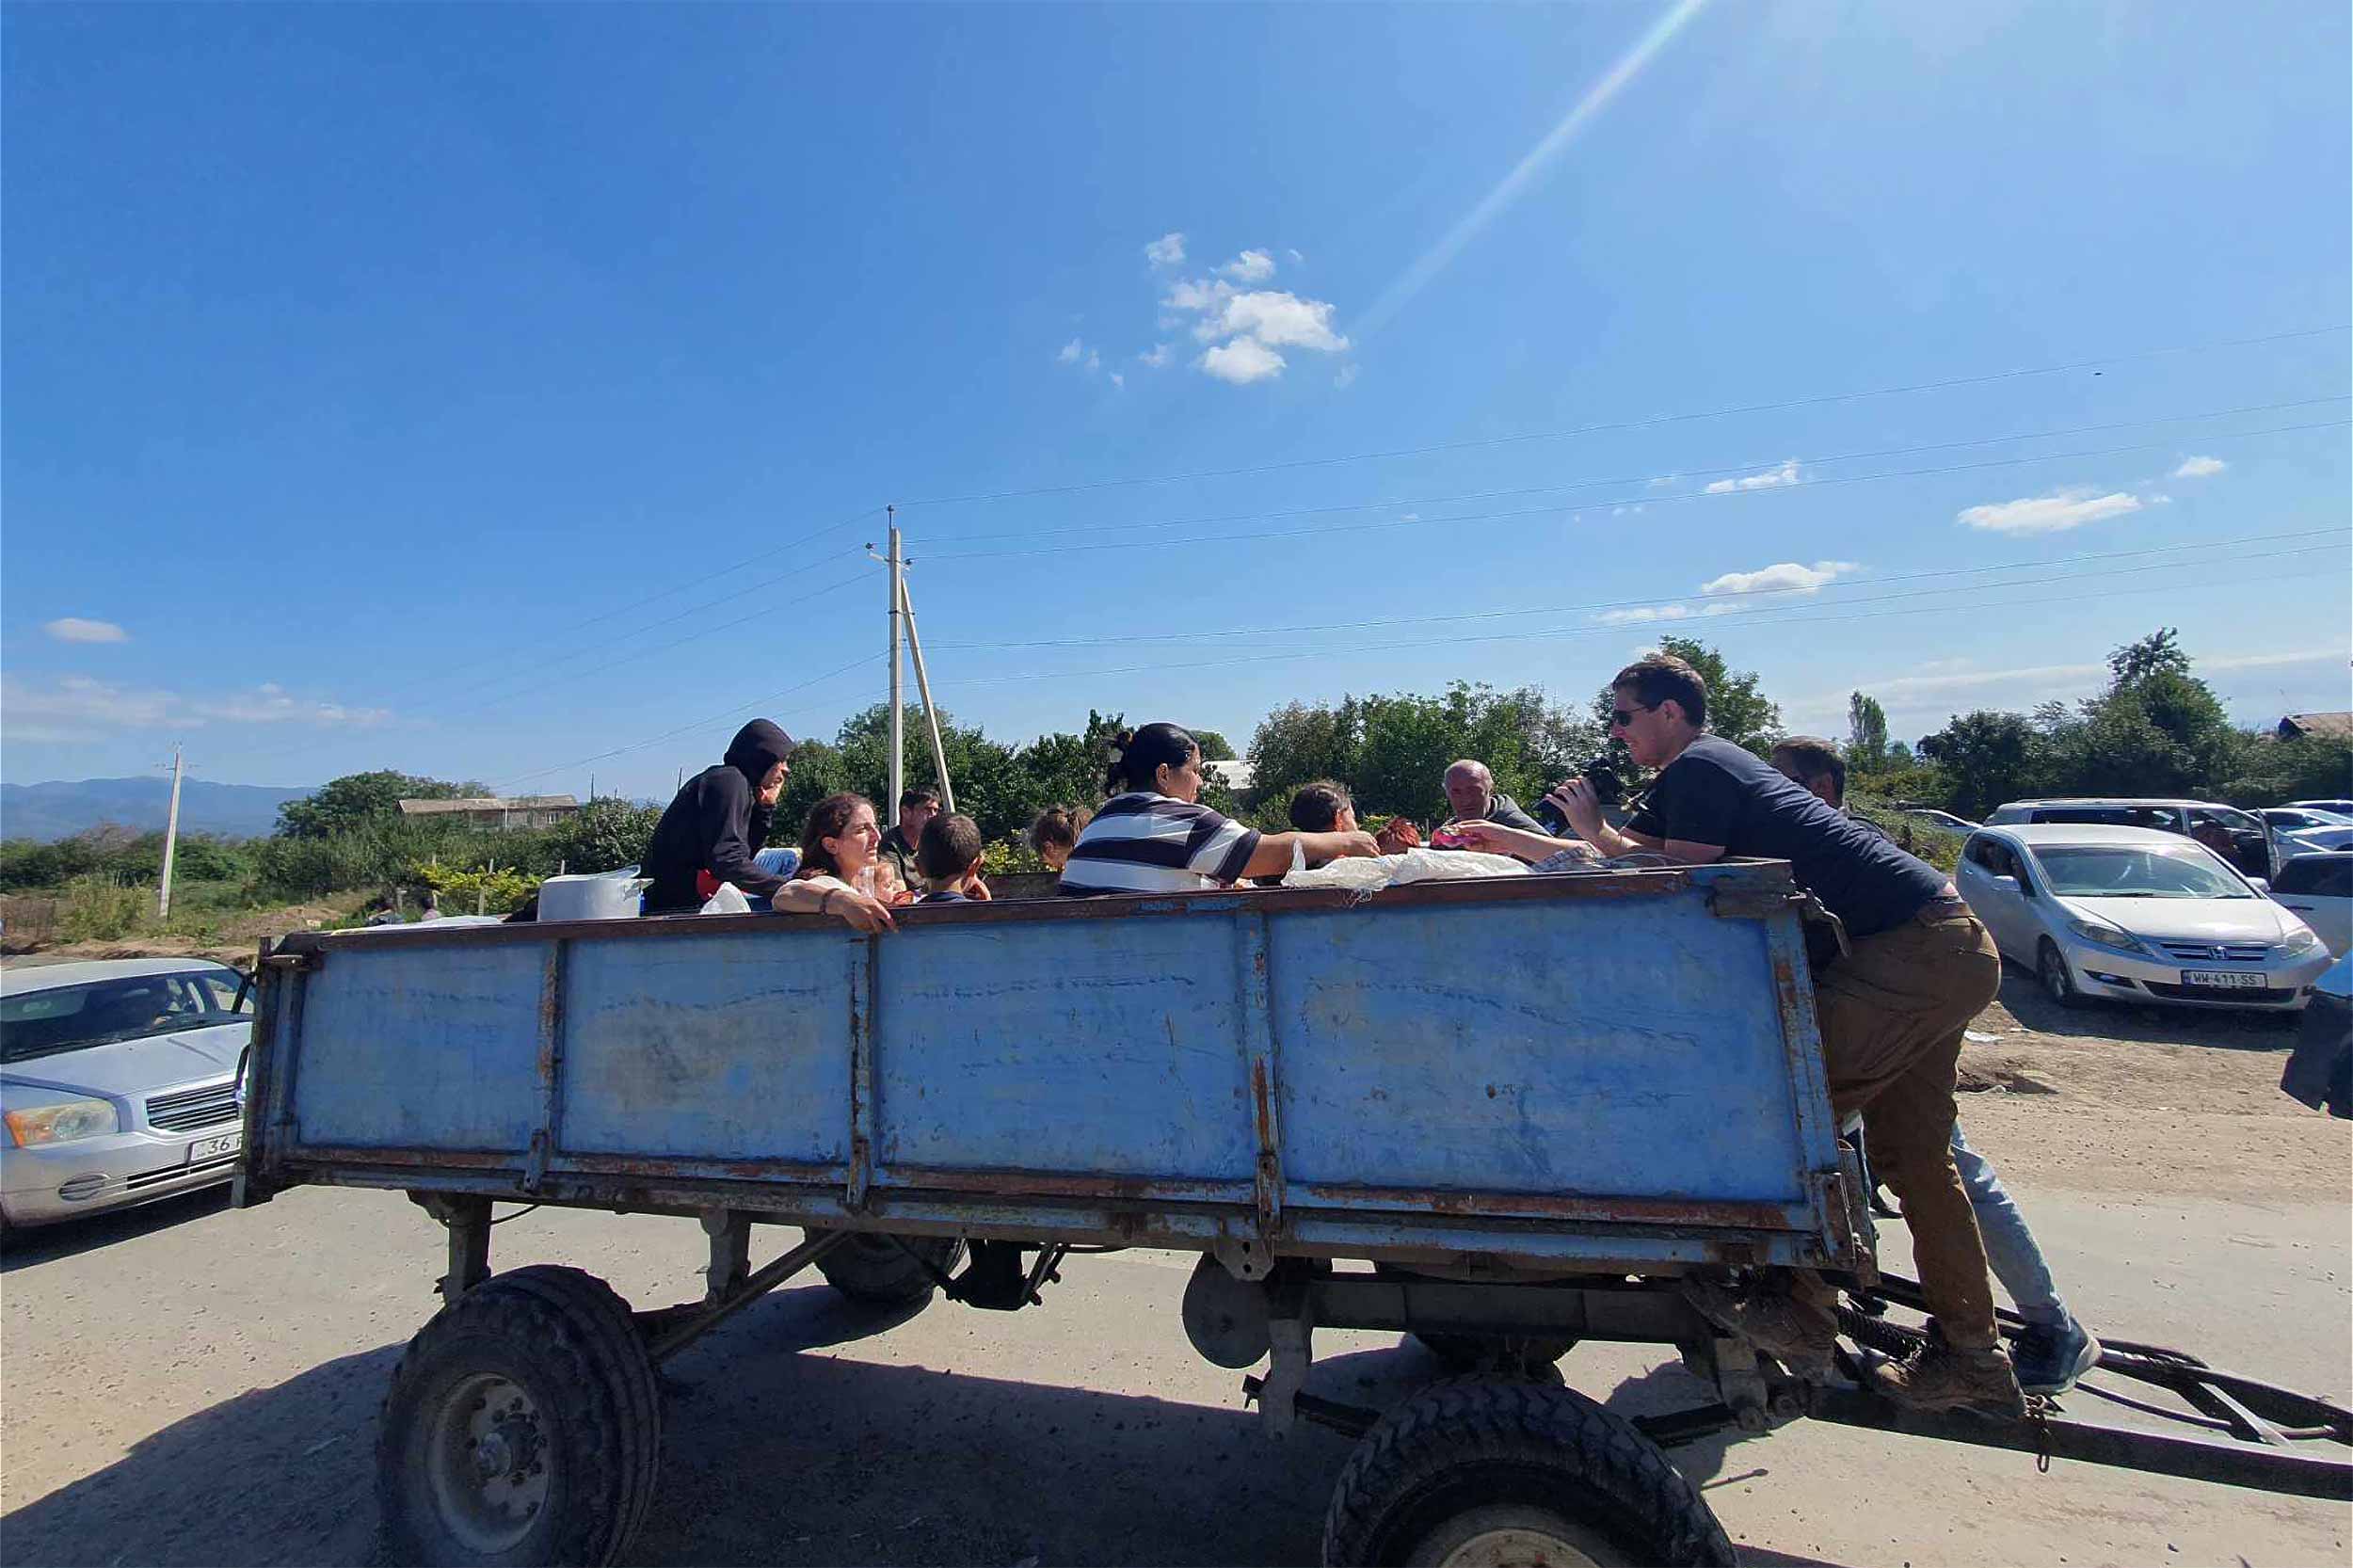 Refugees on a large trailer enter Kornidzor, a village near Goris, in eastern Armenia. People travelled on the Lachin corridor, a serpentine mountain road, which is Karabakh's critical lifeline. The road was reopened on September 24 after nearly ten months. © Arshaluis Mghdesyan 